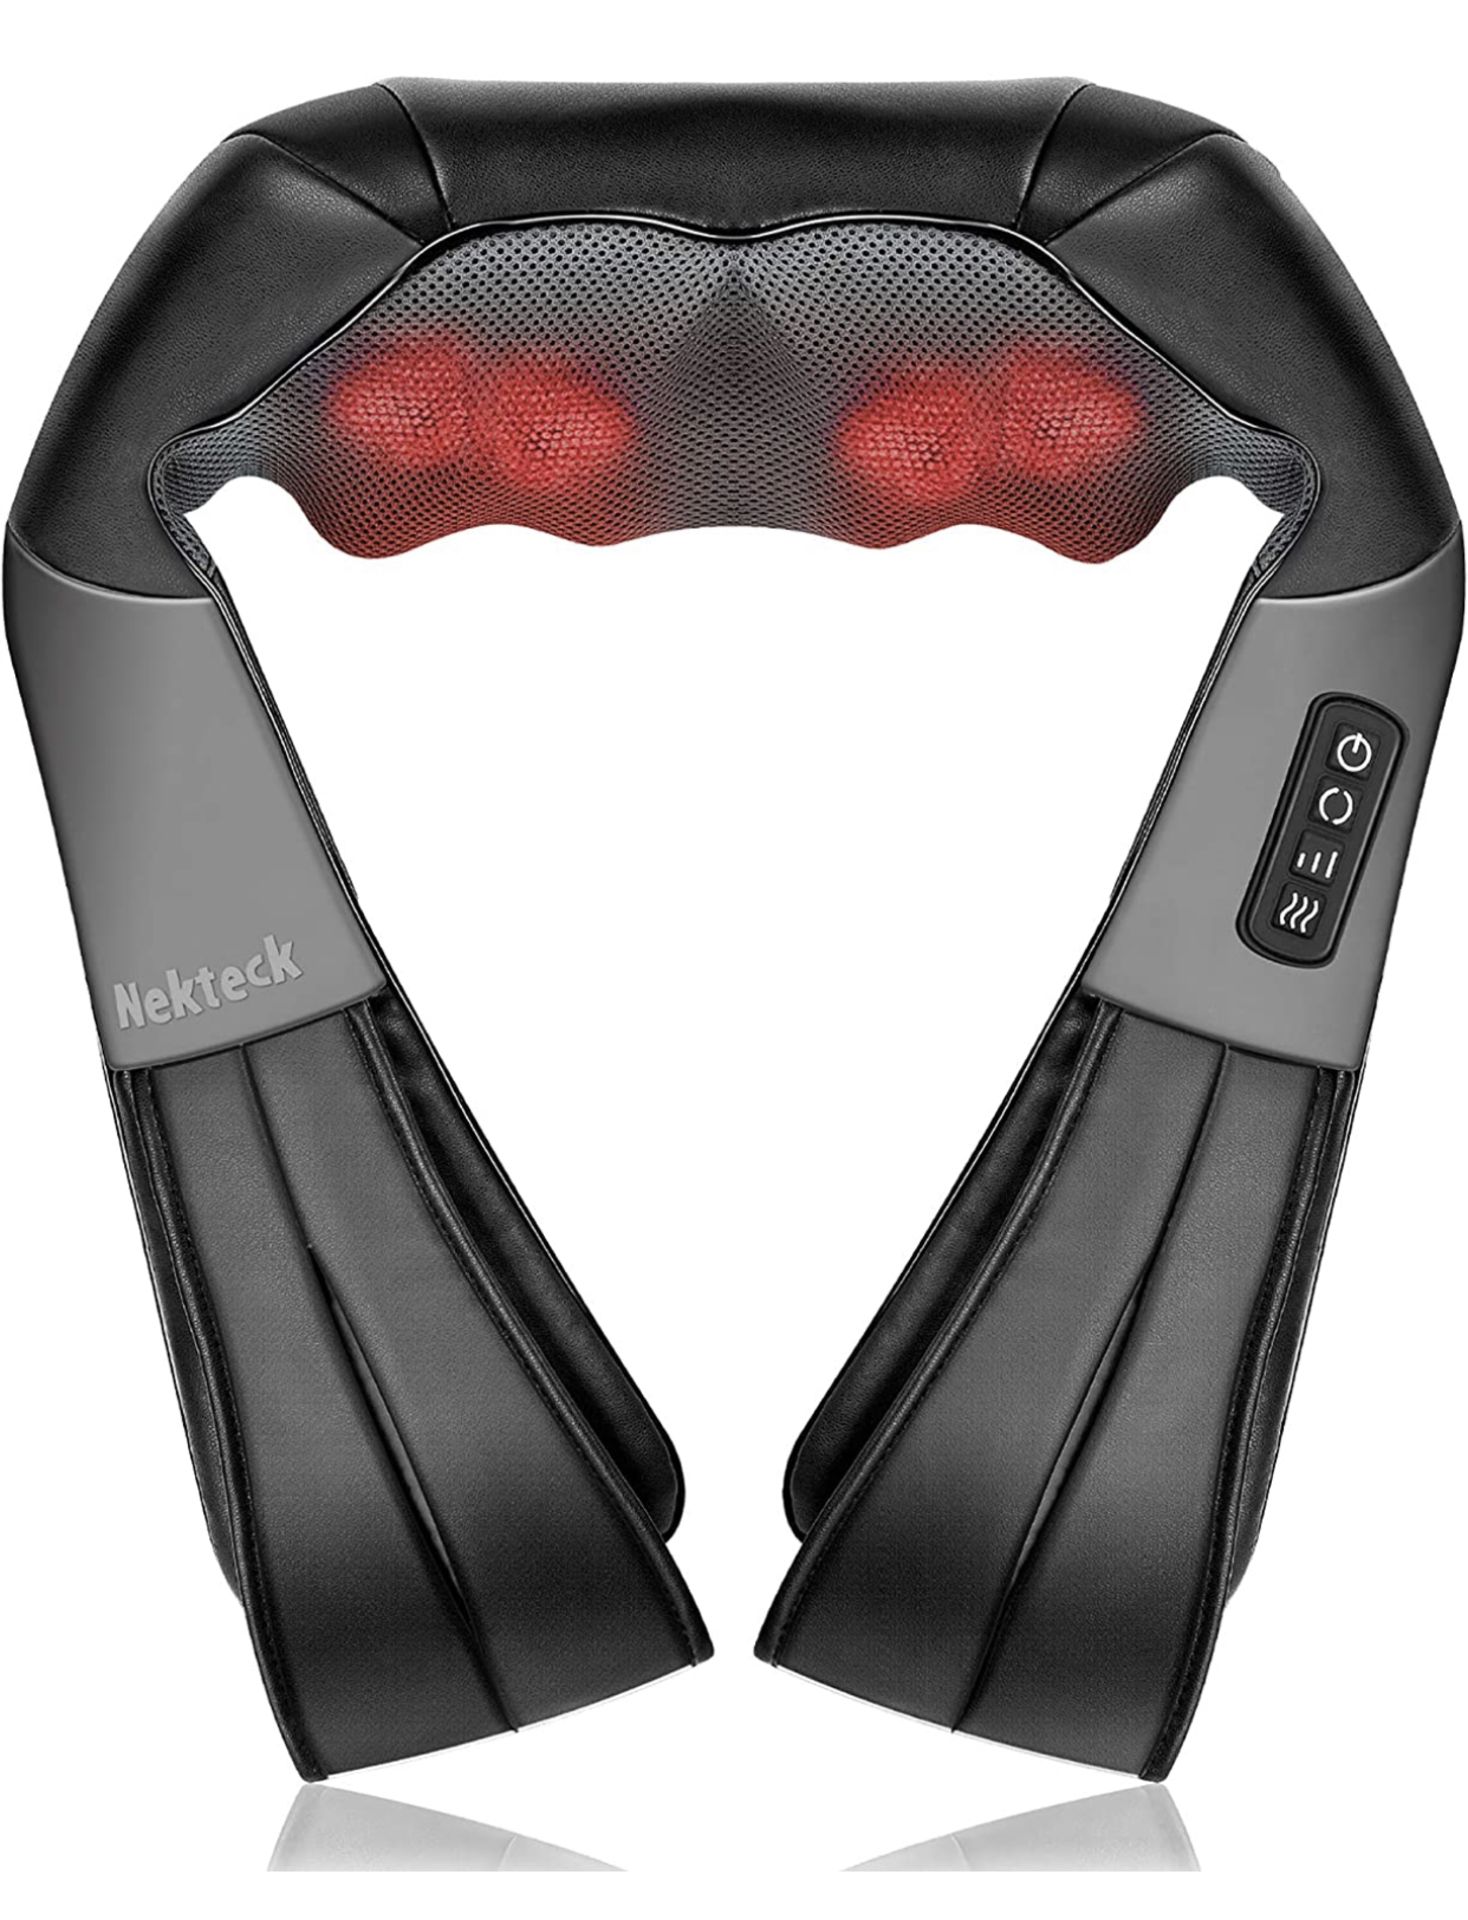 Nekteck Shiatsu Neck and Back Massager with Soothing Heat RRP £33.99